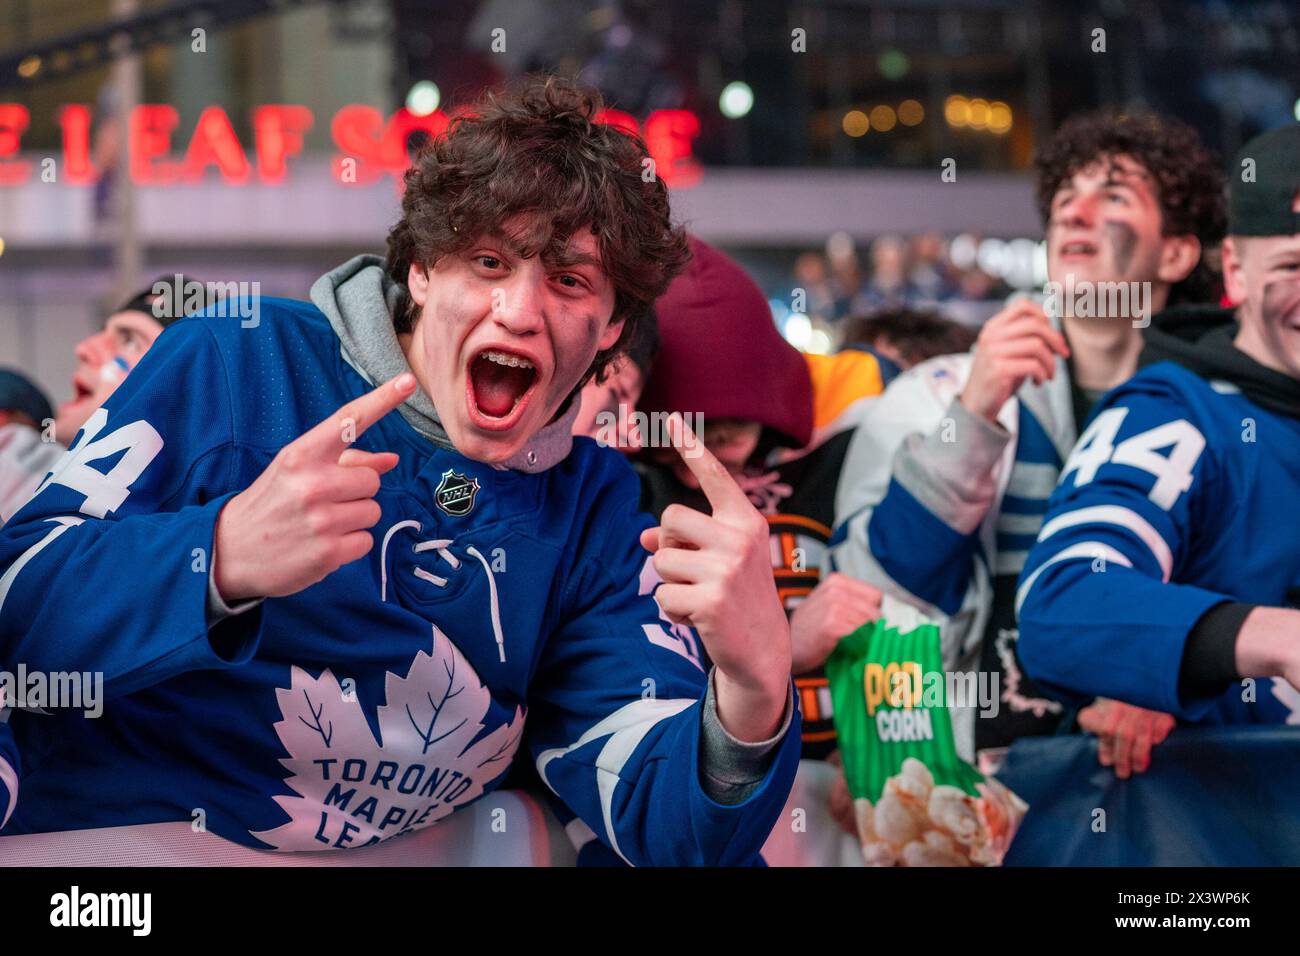 Fans watching the game on a giant screen react as the Toronto Maple Leafs score a goal against the Boston Bruins during Round 1, Game 4 at Maple Leaf Square outside Scotiabank Arena. During Toronto Maple Leafs playoff games, Maple Leaf Square transforms into a sea of blue and white, echoing with the chants of passionate fans eagerly rallying behind their team's quest for victory. The electric atmosphere radiates anticipation and excitement, creating unforgettable memories for both die-hard supporters and casual observers alike. Stock Photo